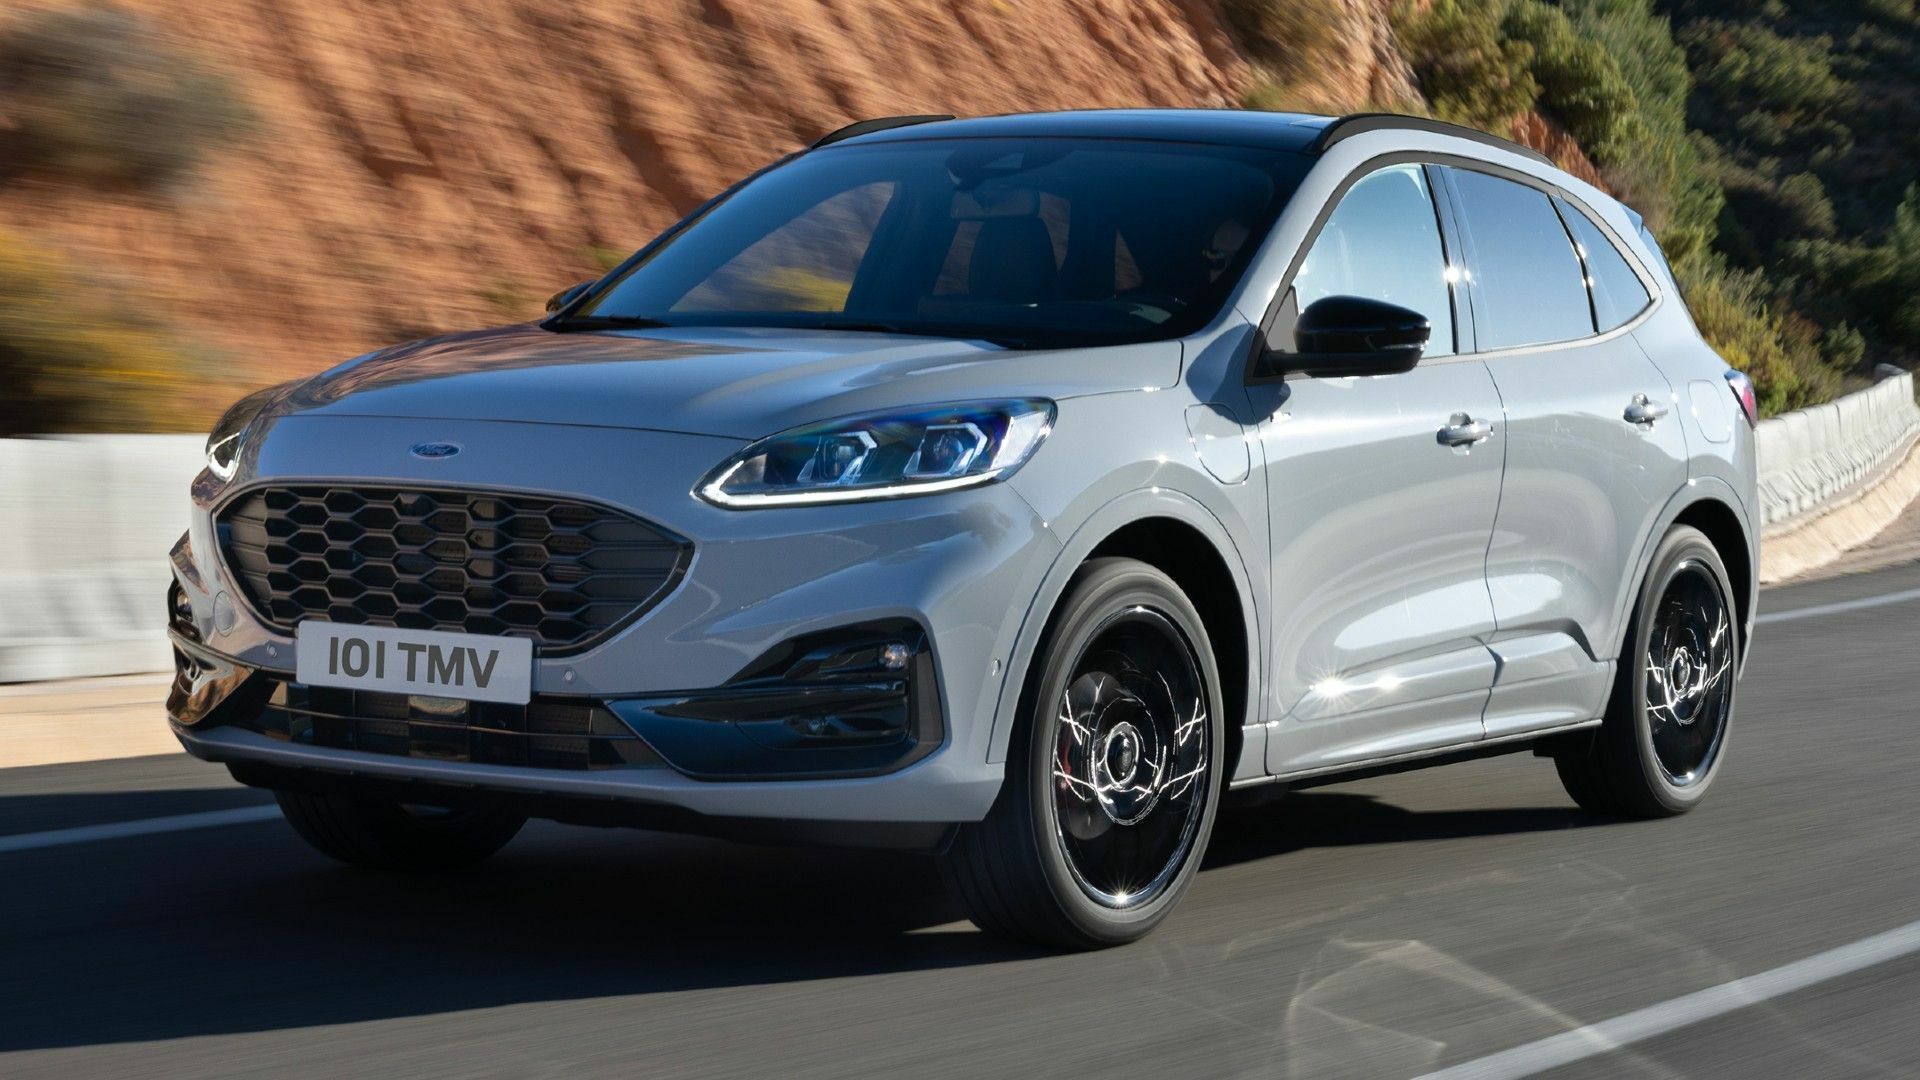 https://www.carscoops.com/wp-content/uploads/2023/04/2023-Ford-Kuga-Graphite-Edition-12.jpg